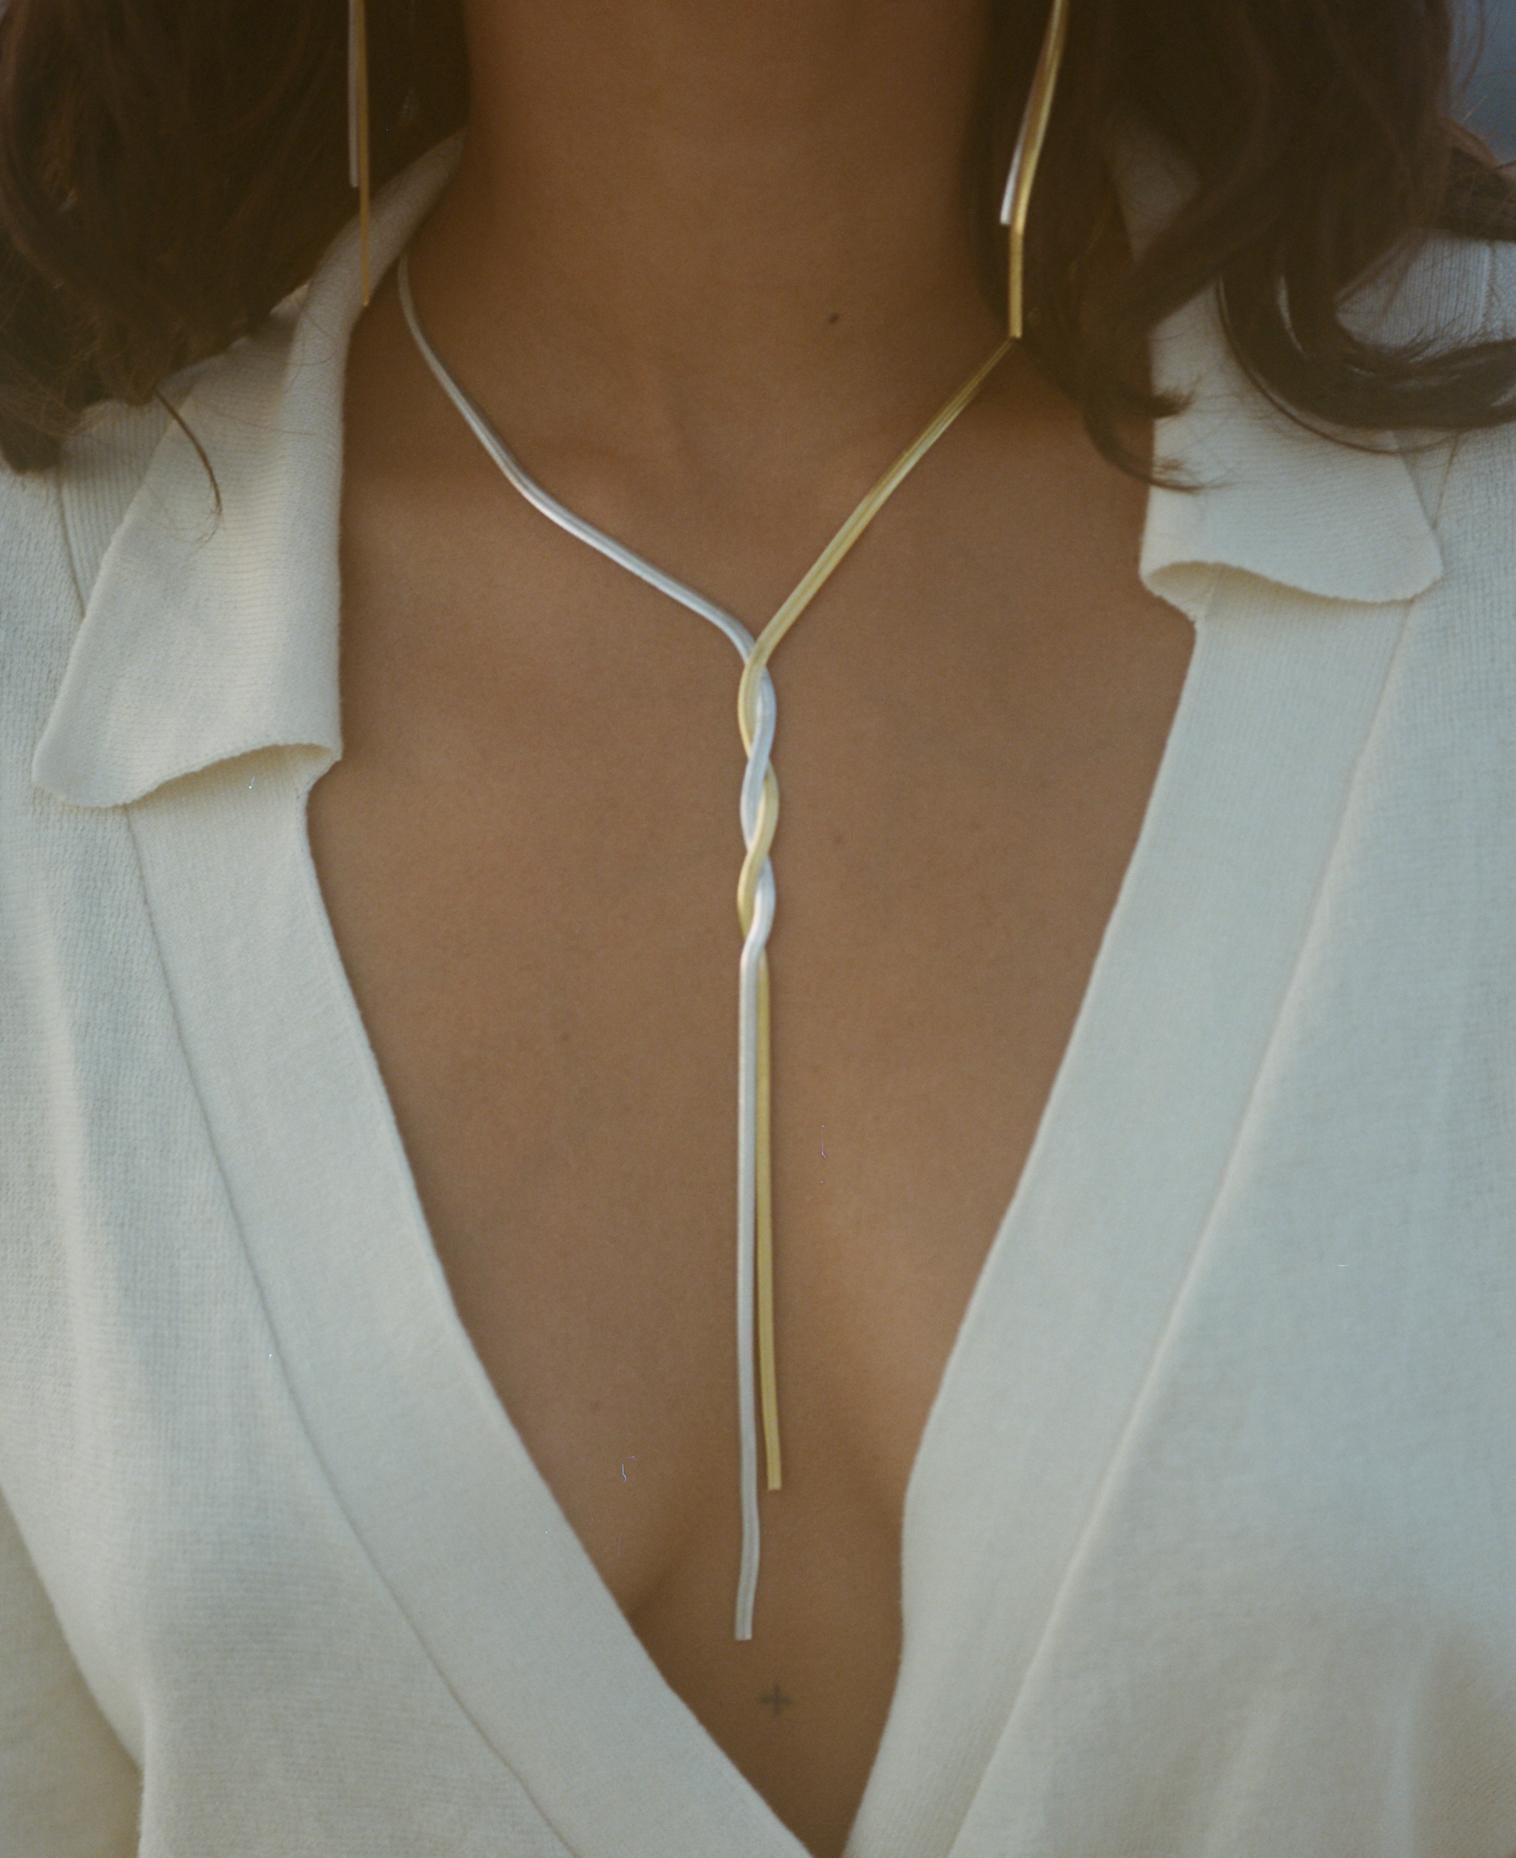 This lariat consists of two flat snake chains looped through each other. This is a very graceful piece inspired by nature's delicate shapes and movement, bringing elegance to any outfit.

Metal: silver gold plated 